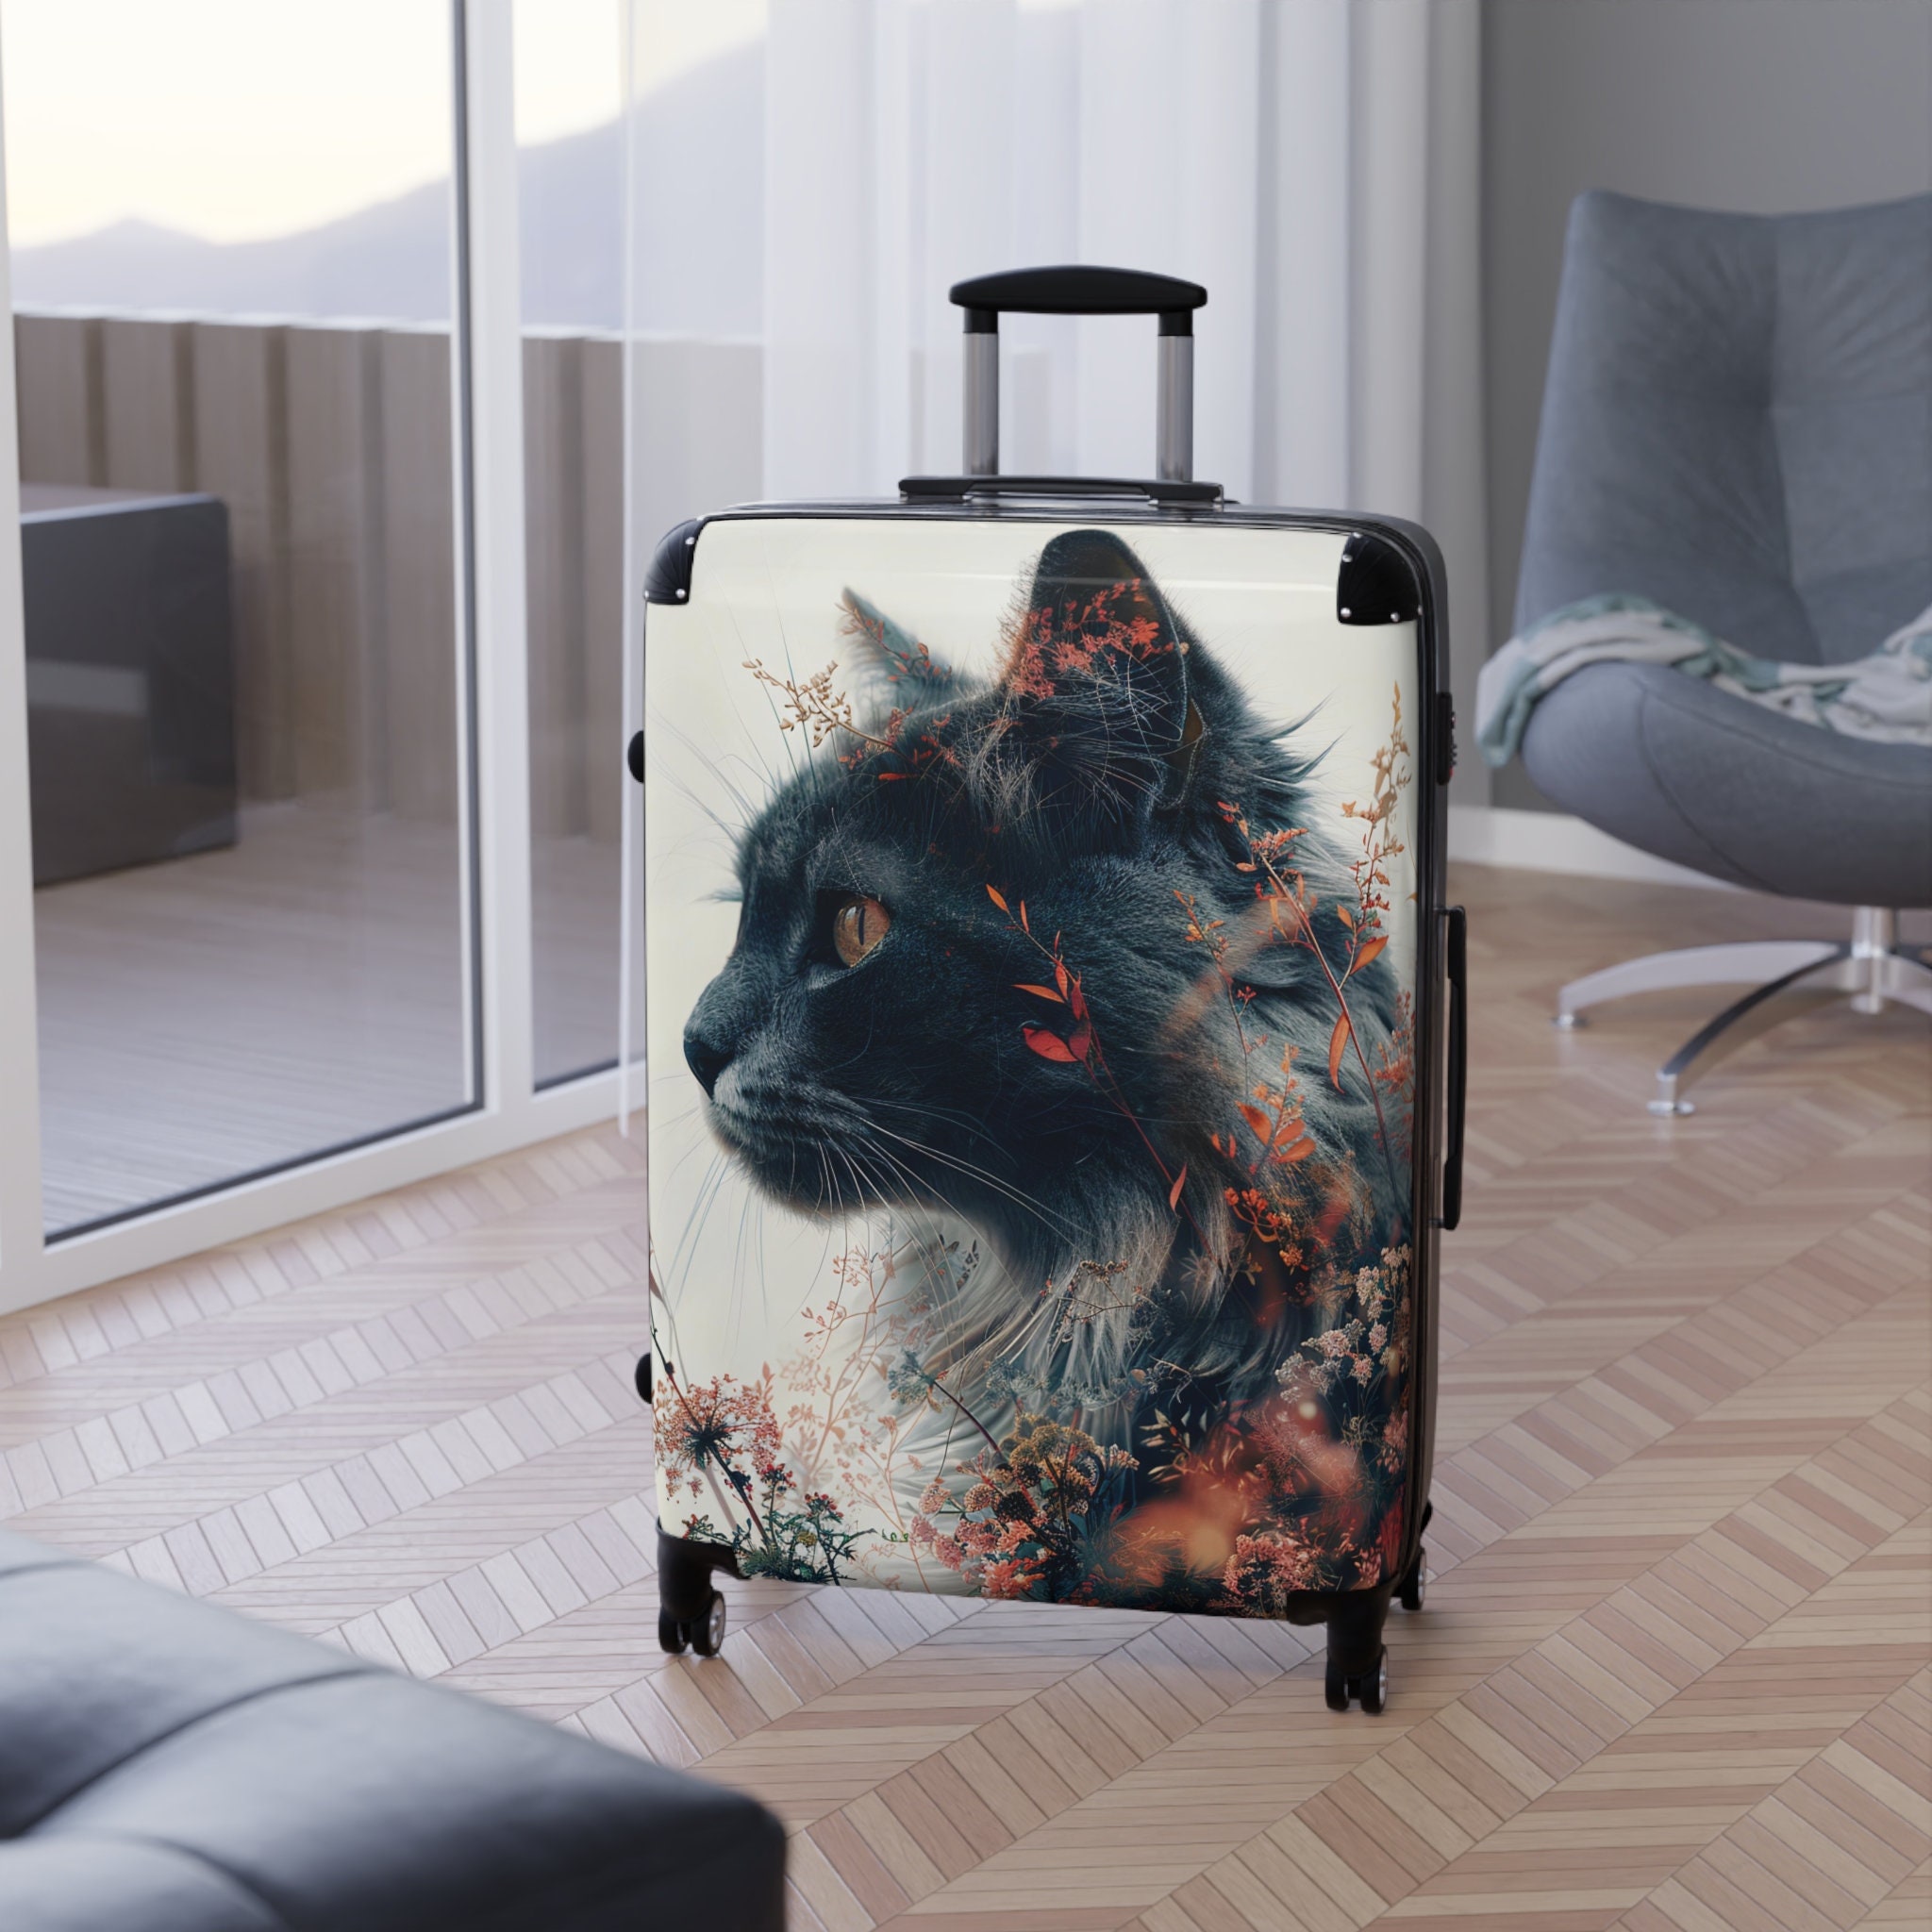 Floral Cat Face Suitcase - Distinct Whiskers Pattern, Hard-Shell Travel Luggage with 360 Swivel Wheels & Lock